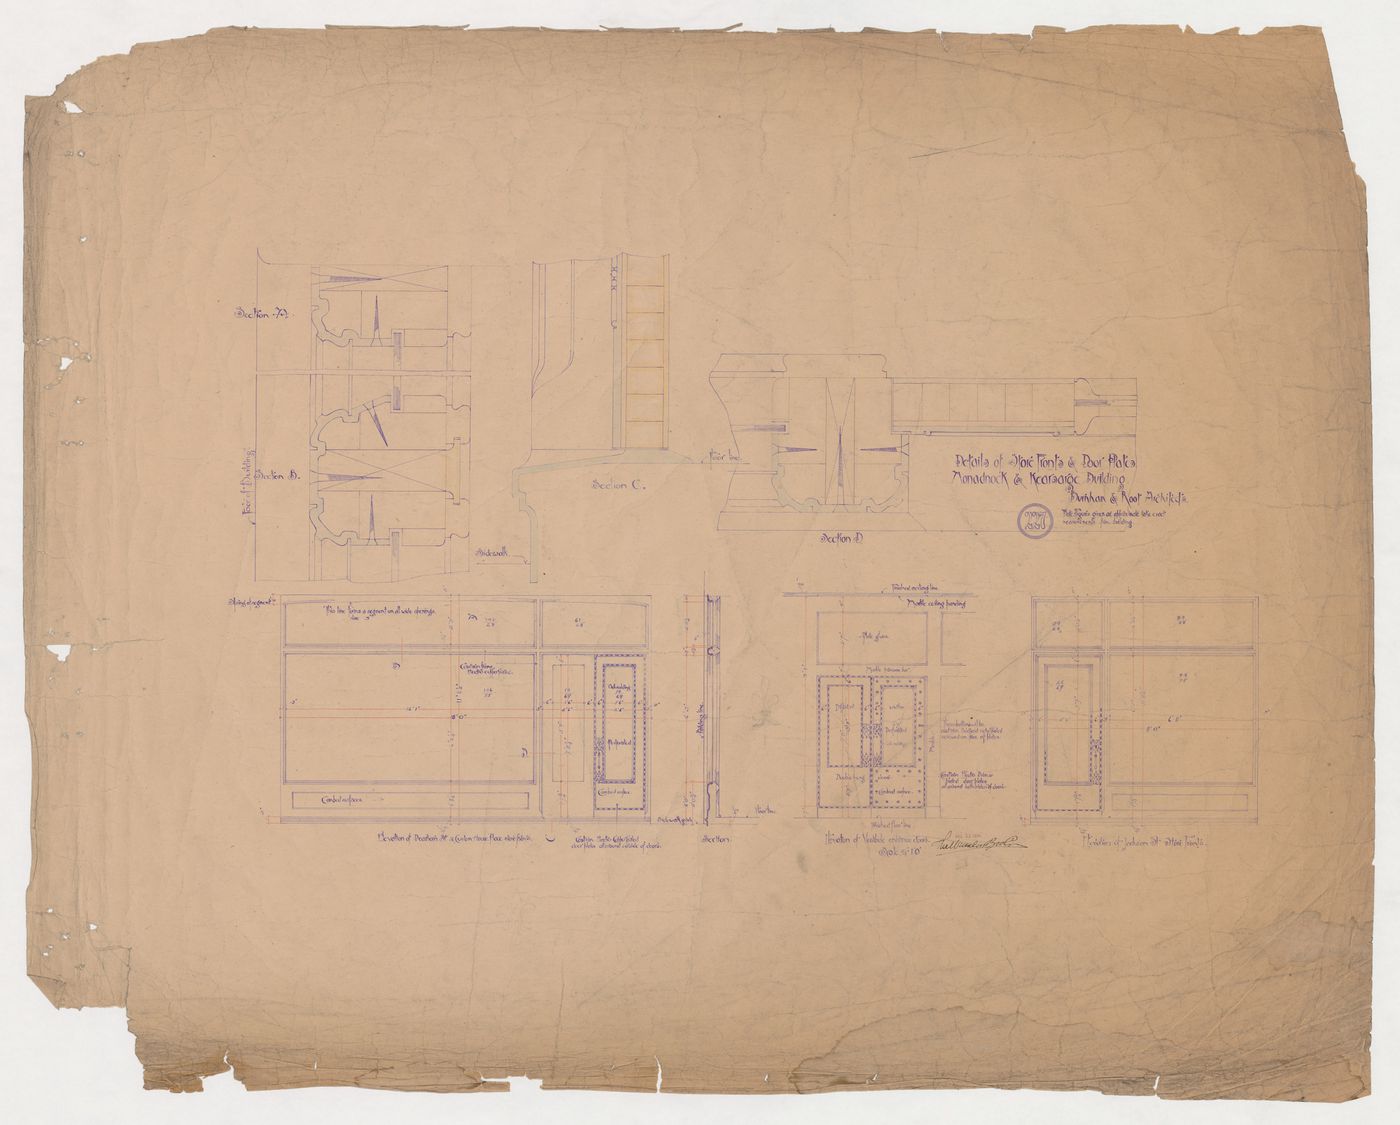 Monadnock and Kearsarge Buildings, Chicago: Elevations for the storefronts and vestibule doors and plan and sectional details for the storefronts and doorplates